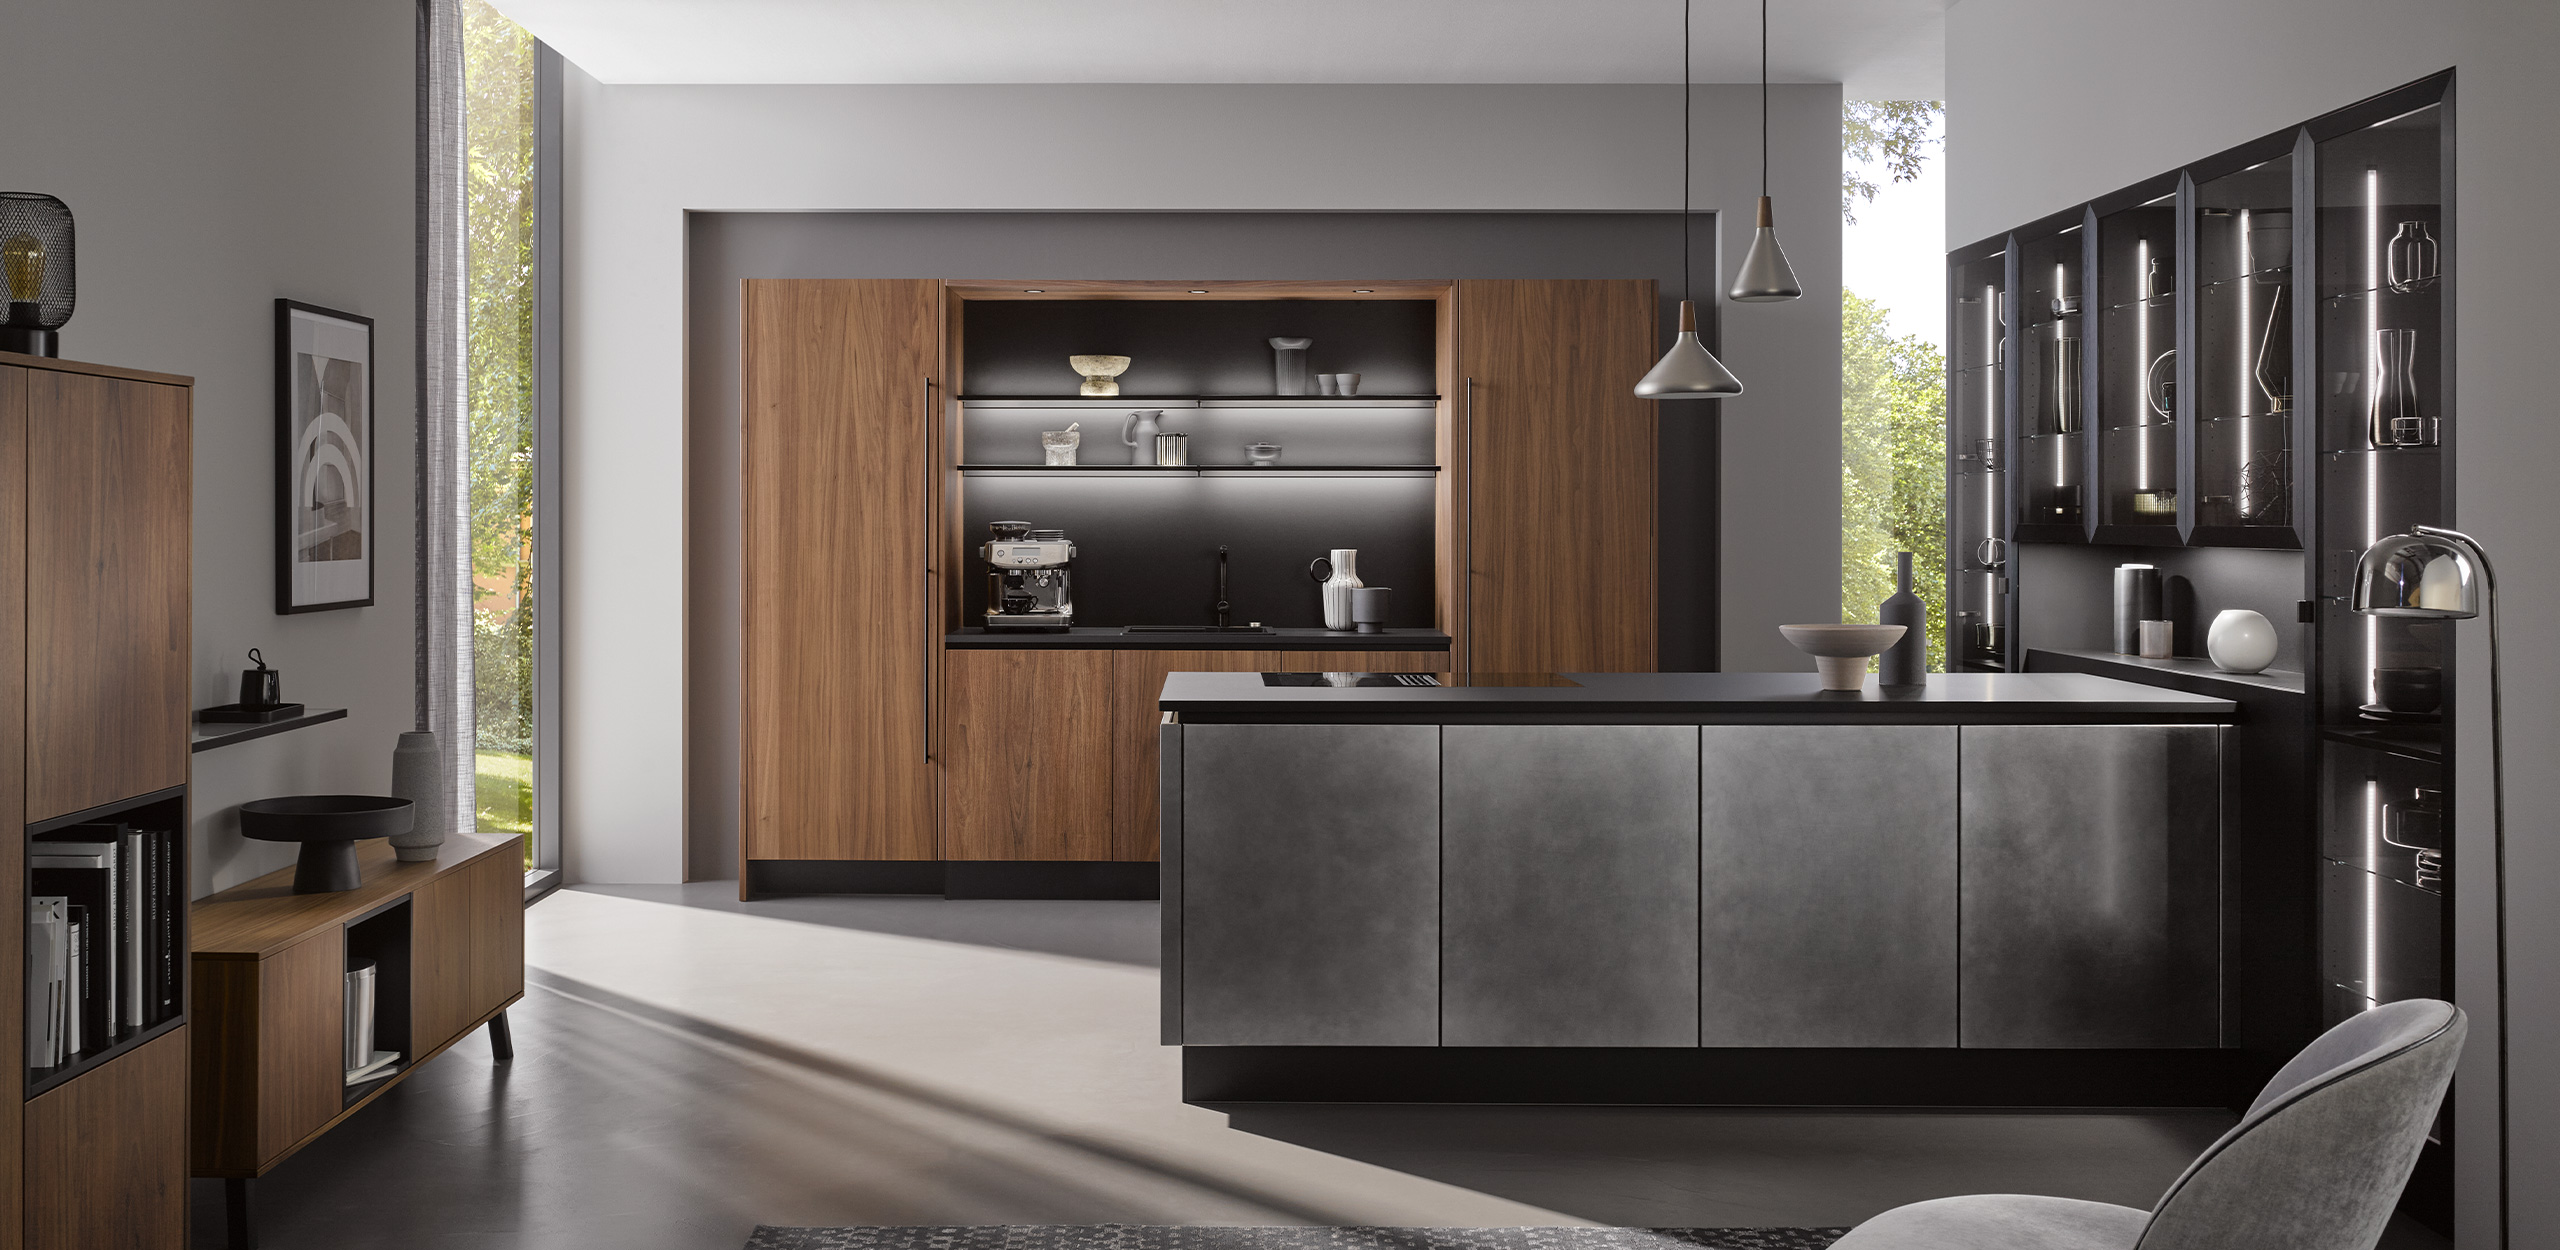 Image of systemat AV 6088-GL Elegant Walnut with kitchen island in industrial steel look in the foreground 